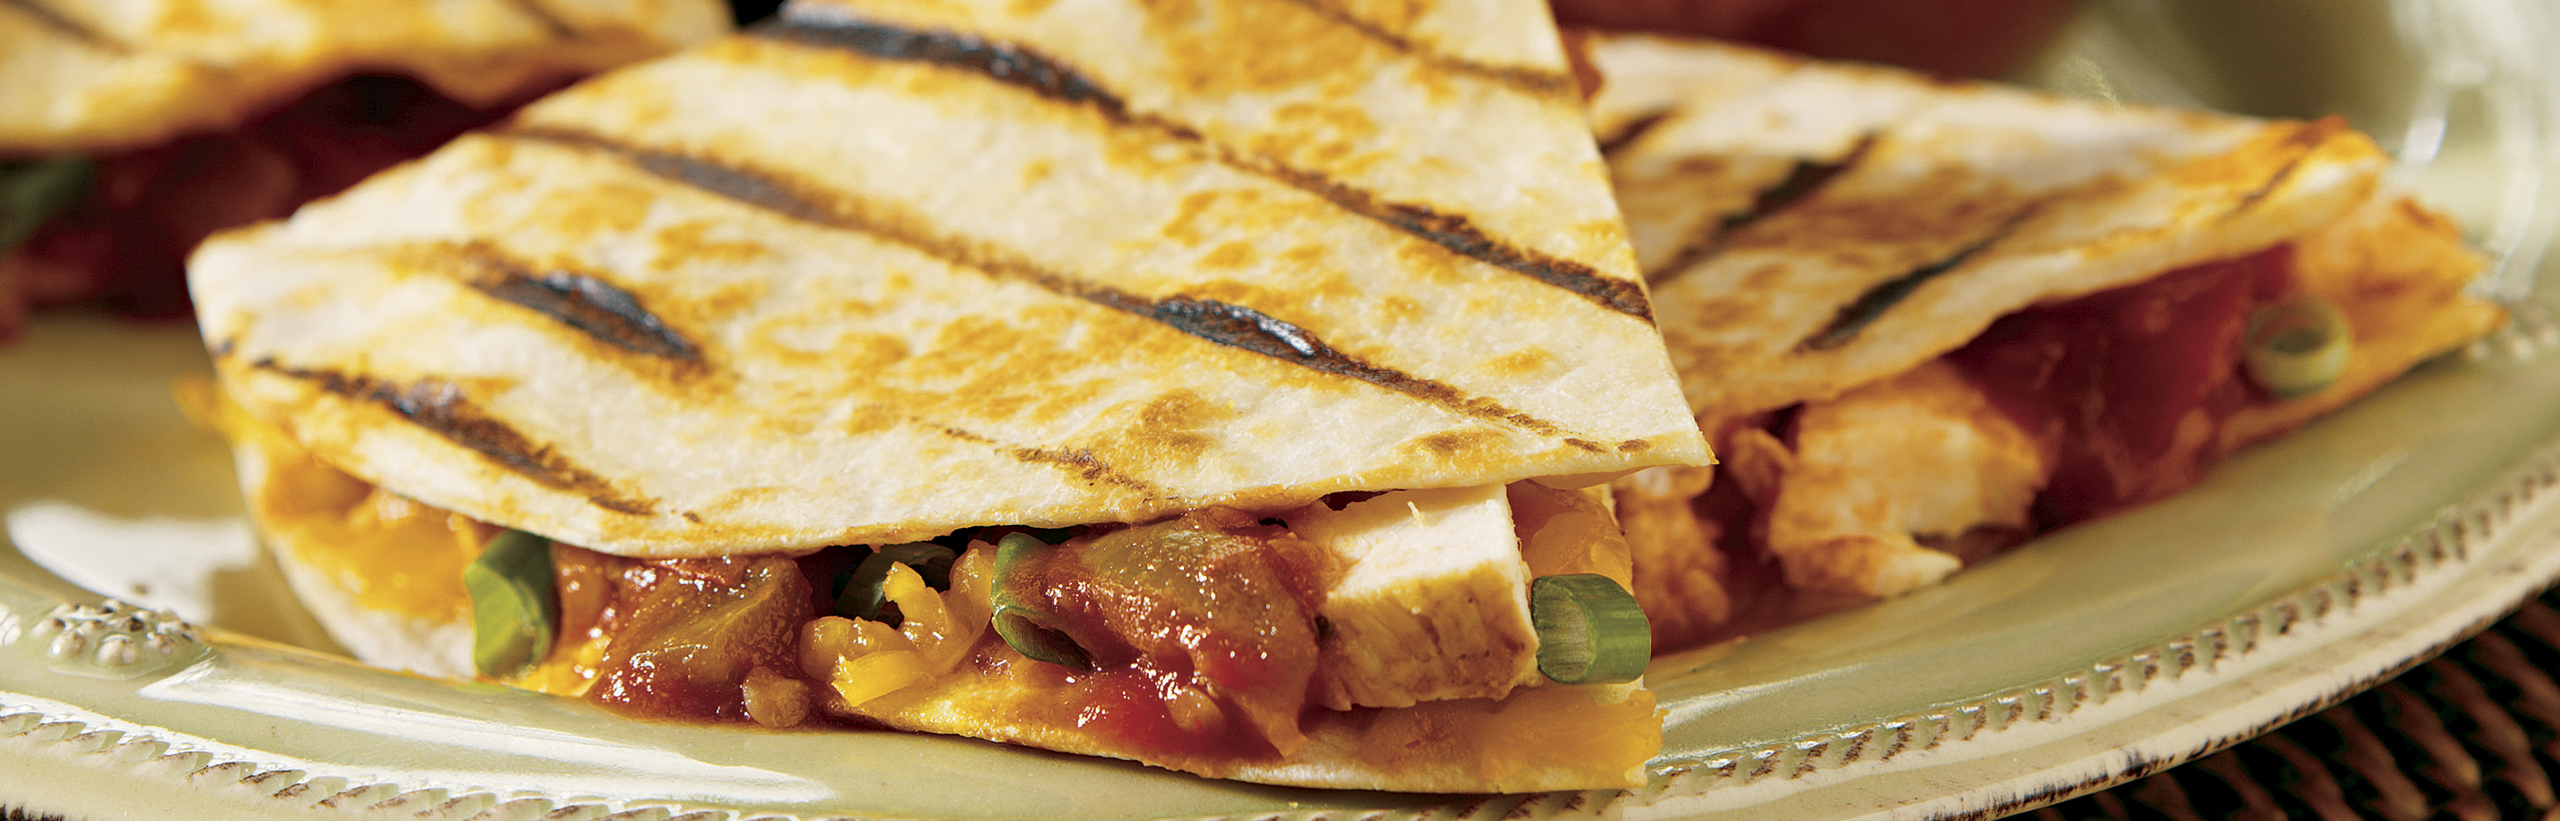 https://www.campbells.com/pace/wp-content/uploads/2020/12/Spicy-Grilled-Quesadillas.jpg